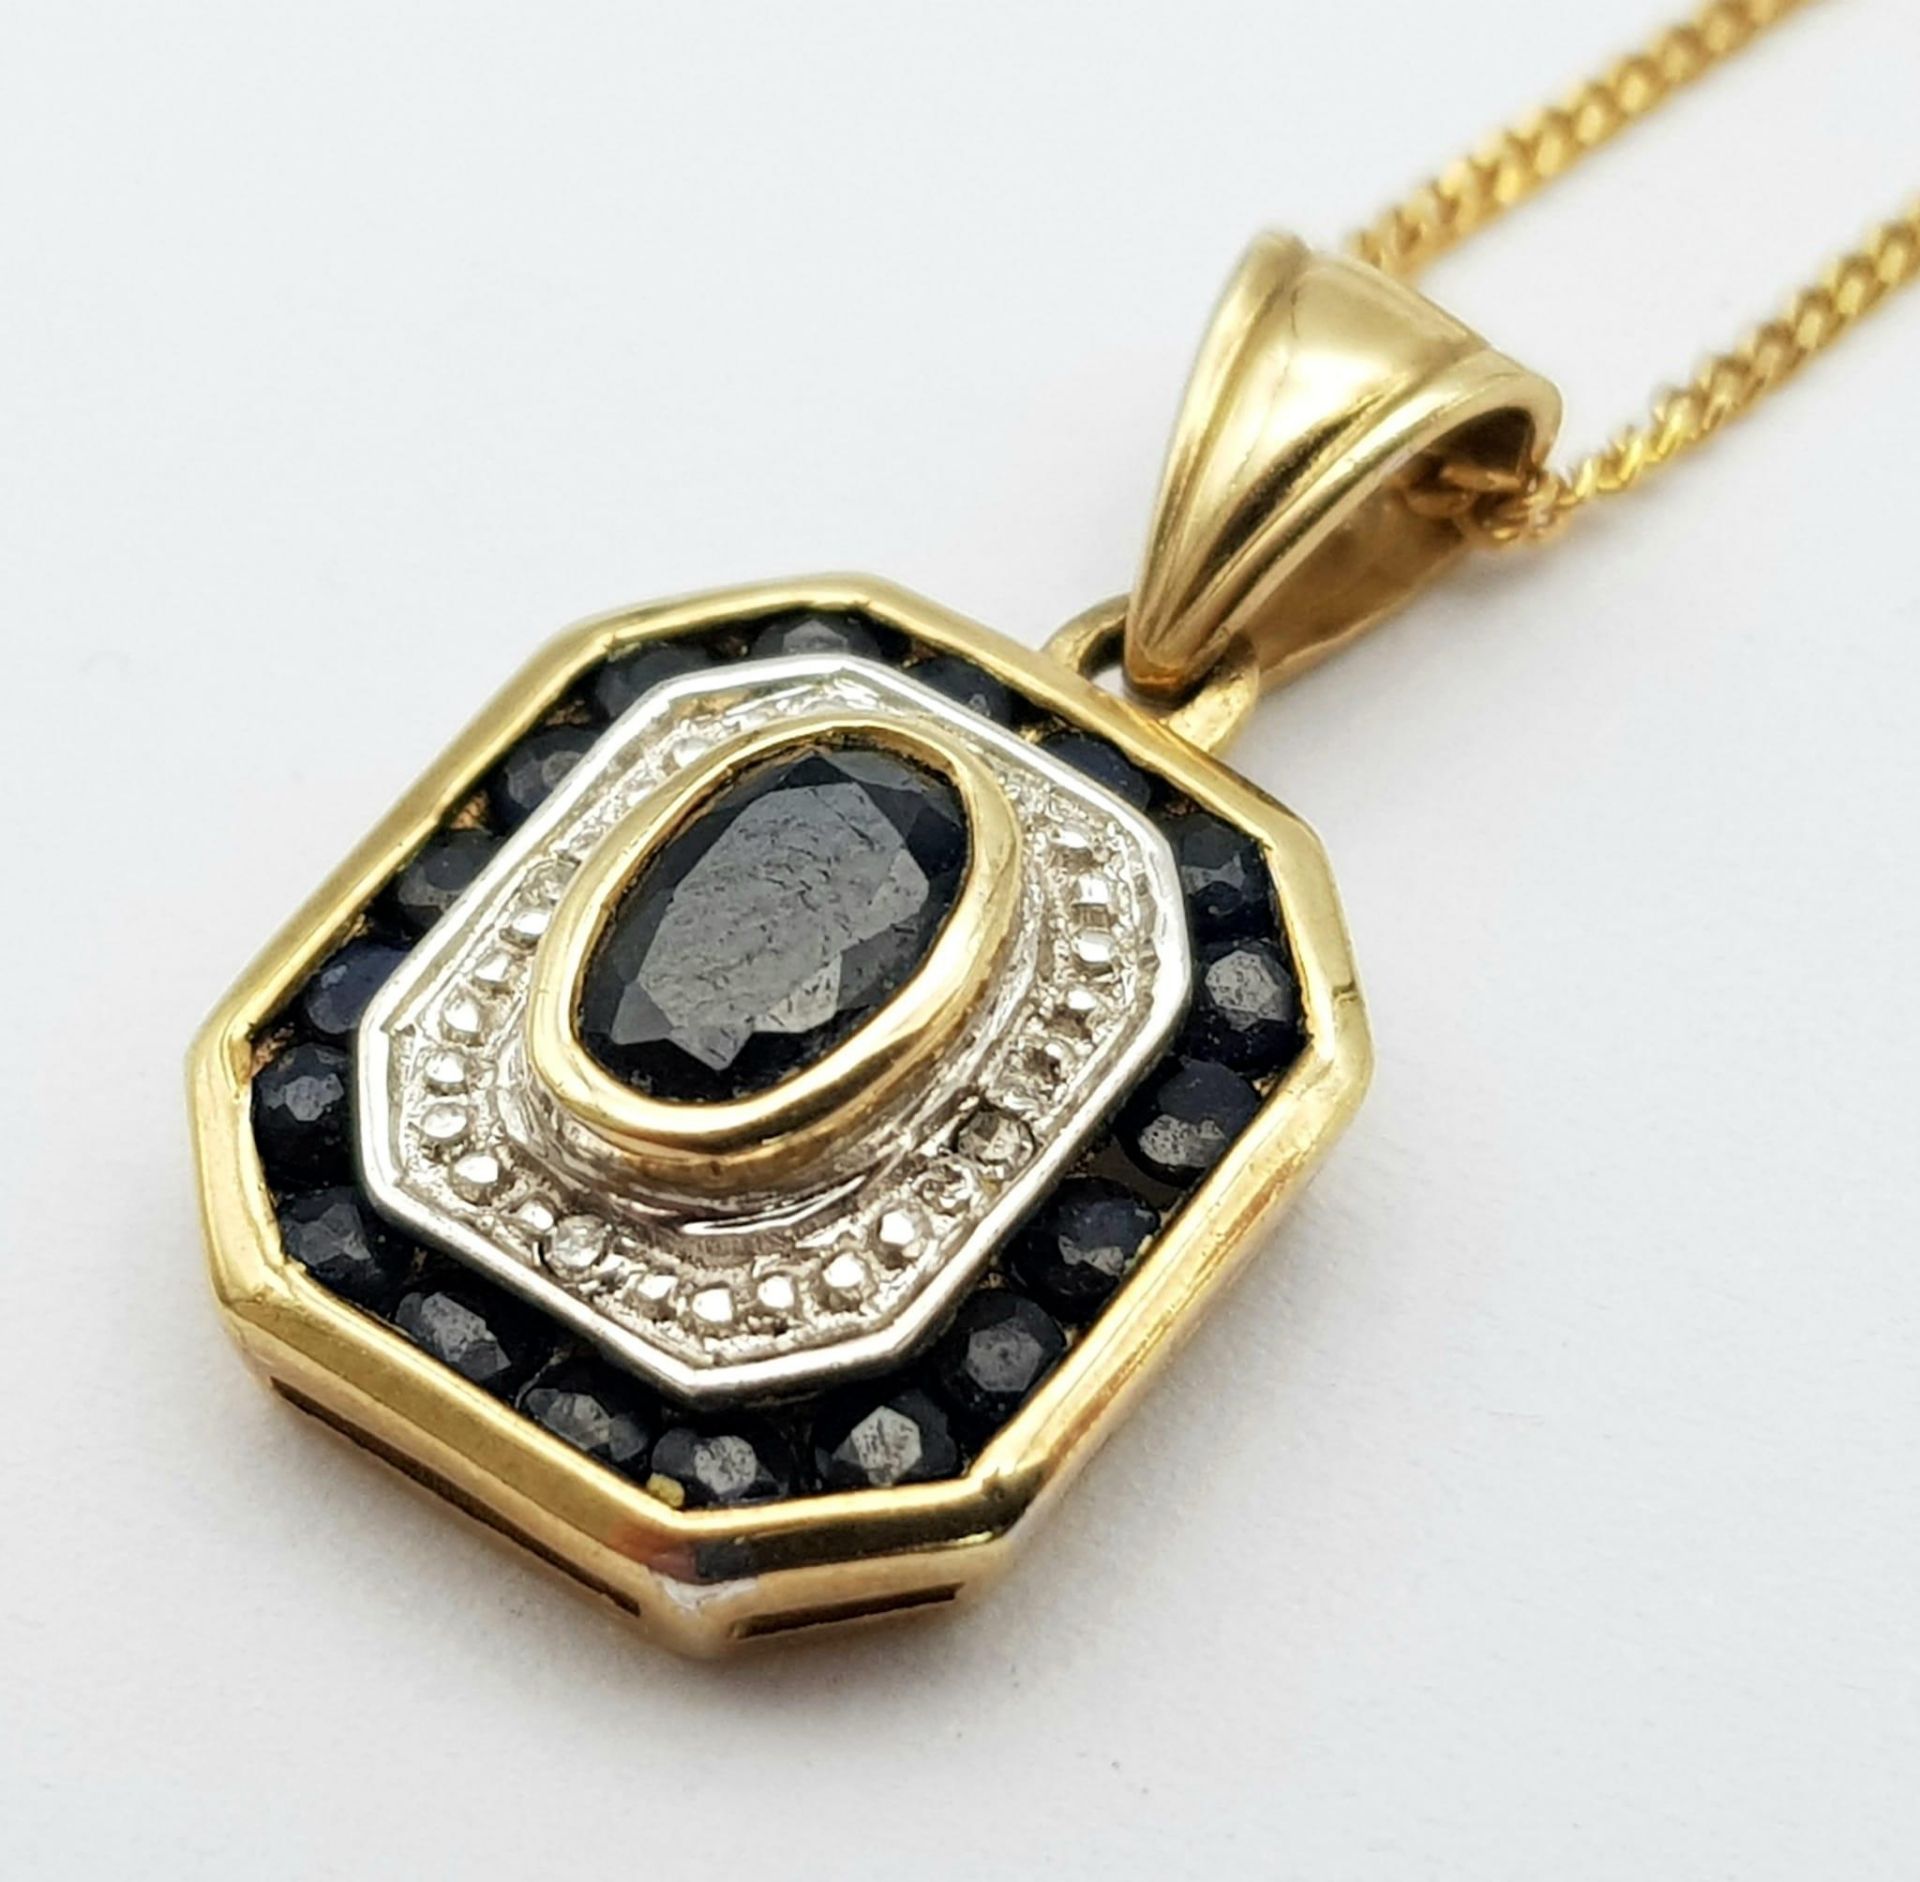 A 9K Yellow Gold Sapphire and Diamond Pendant on a 9K Yellow Gold Disappearing Necklace. Pendant - - Image 3 of 5